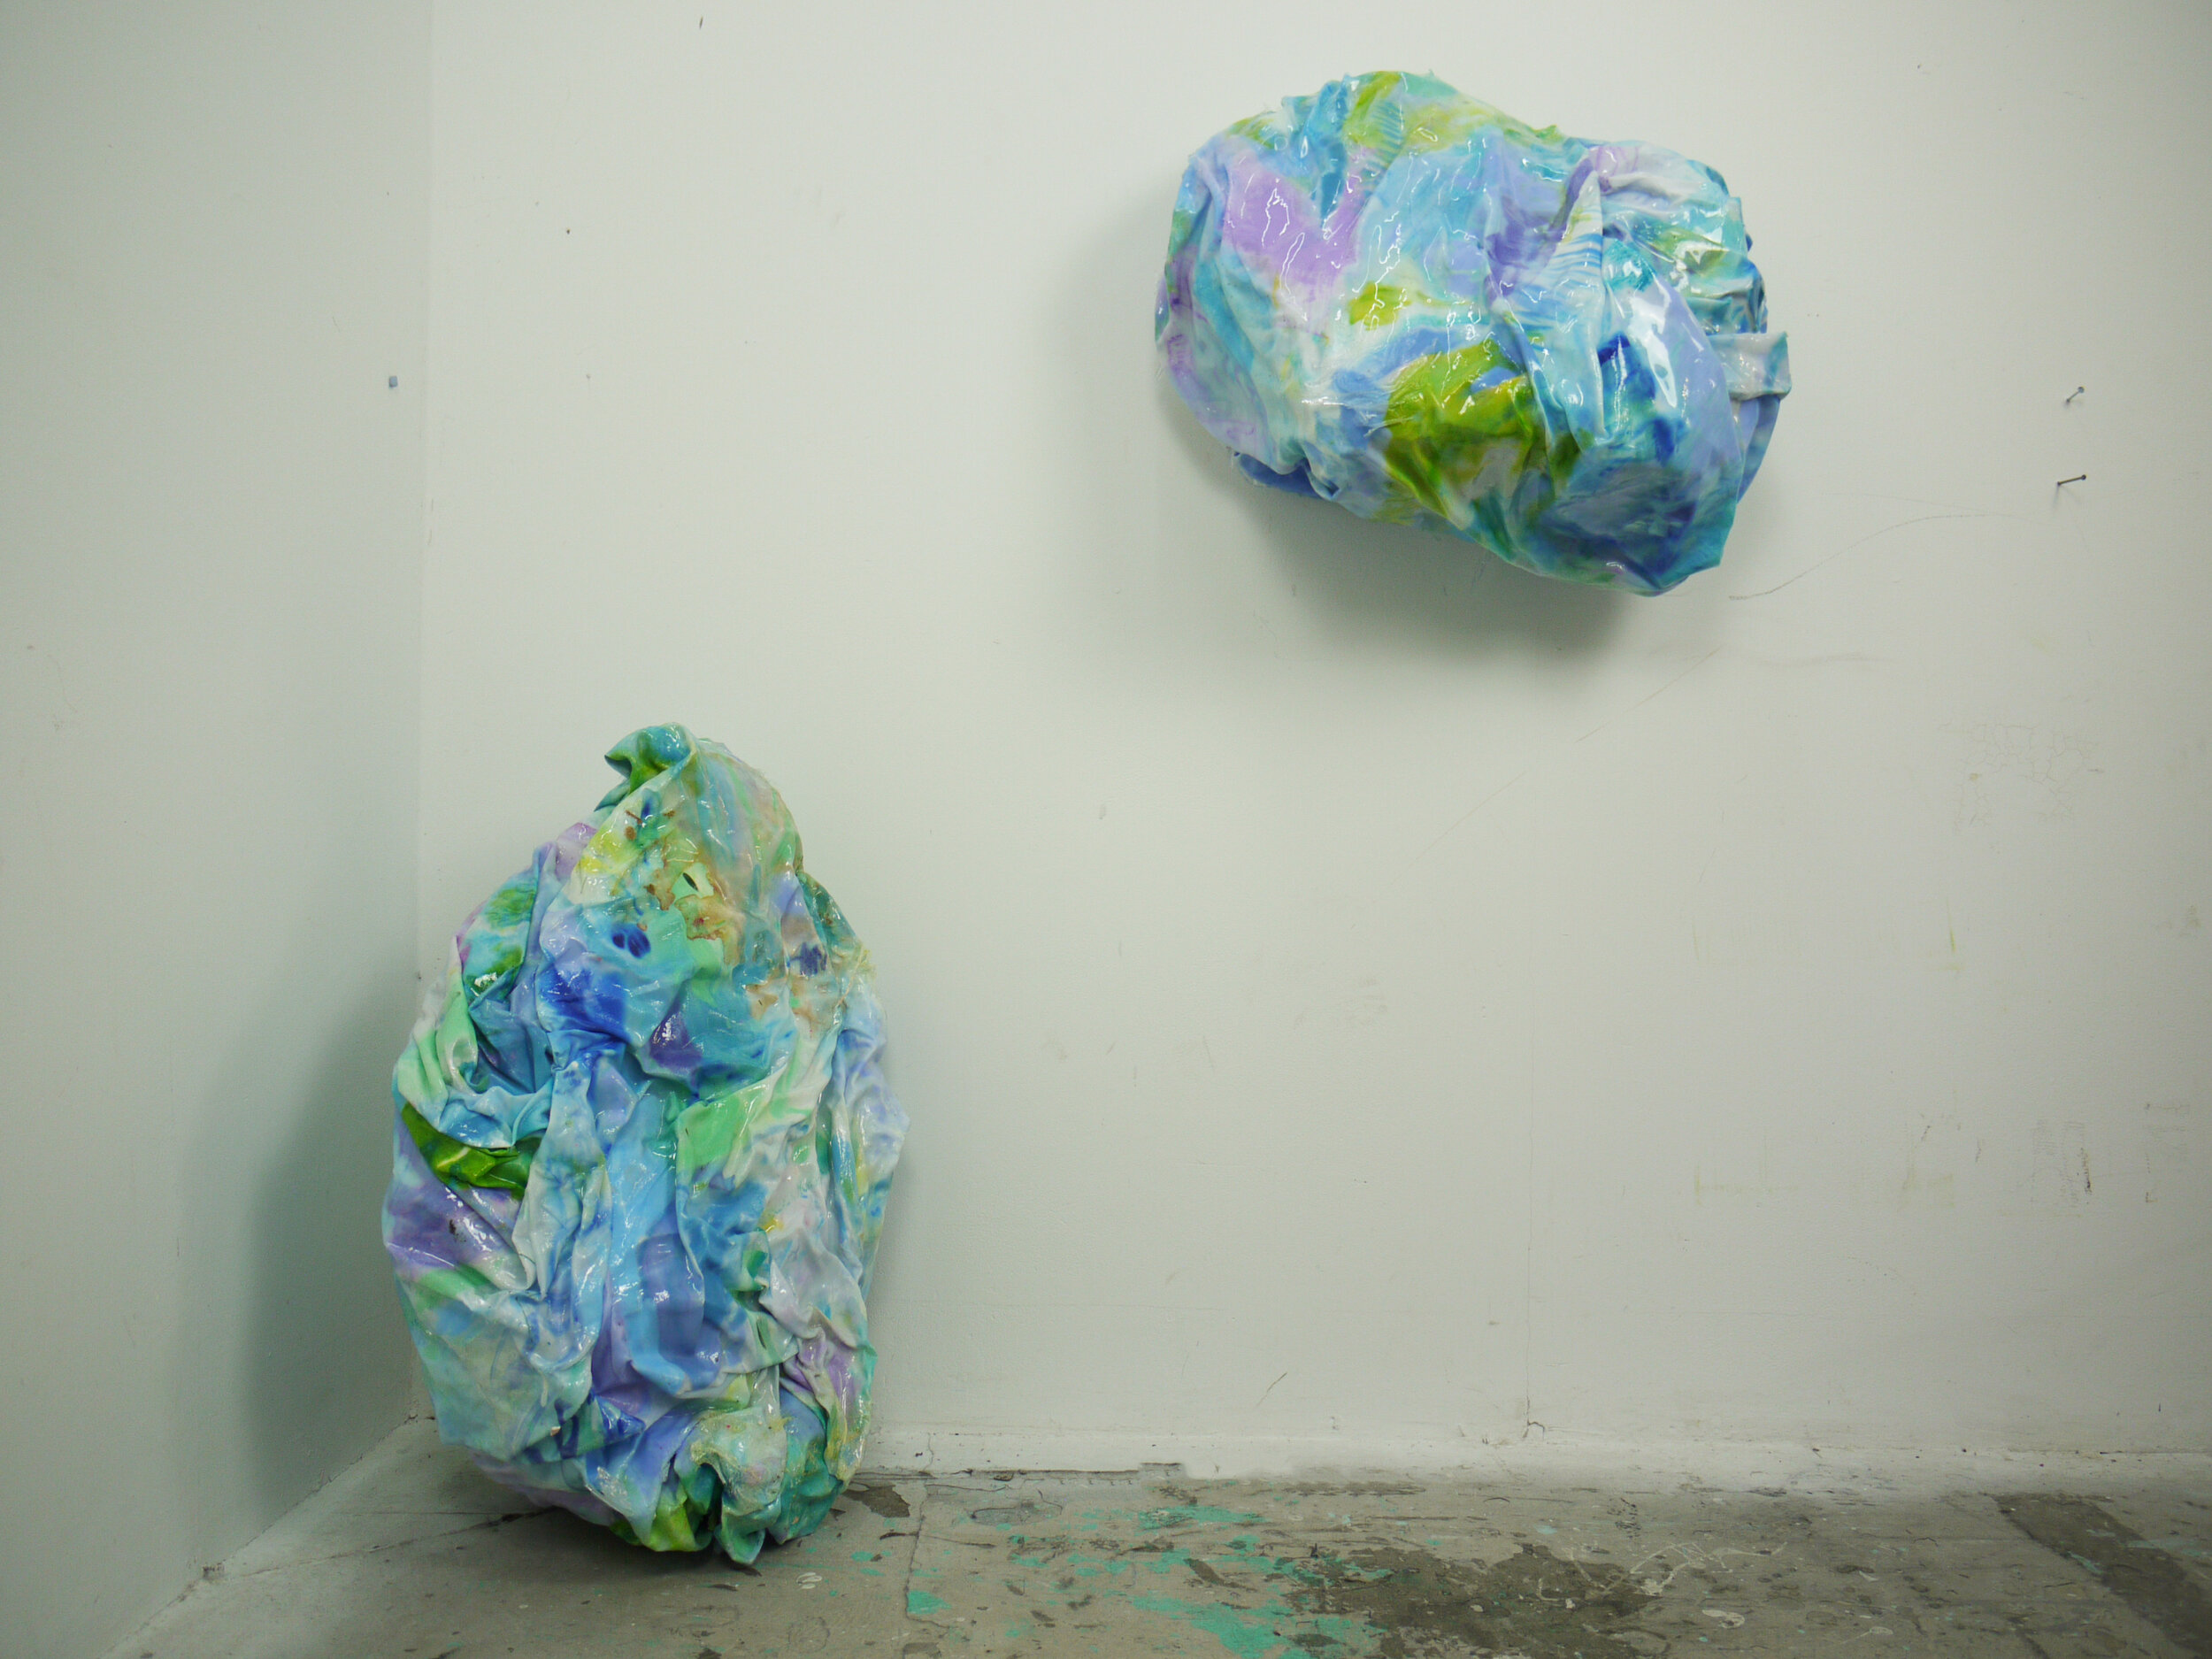     “You and I”     (March 2021)     Medium: Resin, soap dyeing pigment, acrylic, fabric, wire    Installation Size: 50cm x 150cm x 45cm     